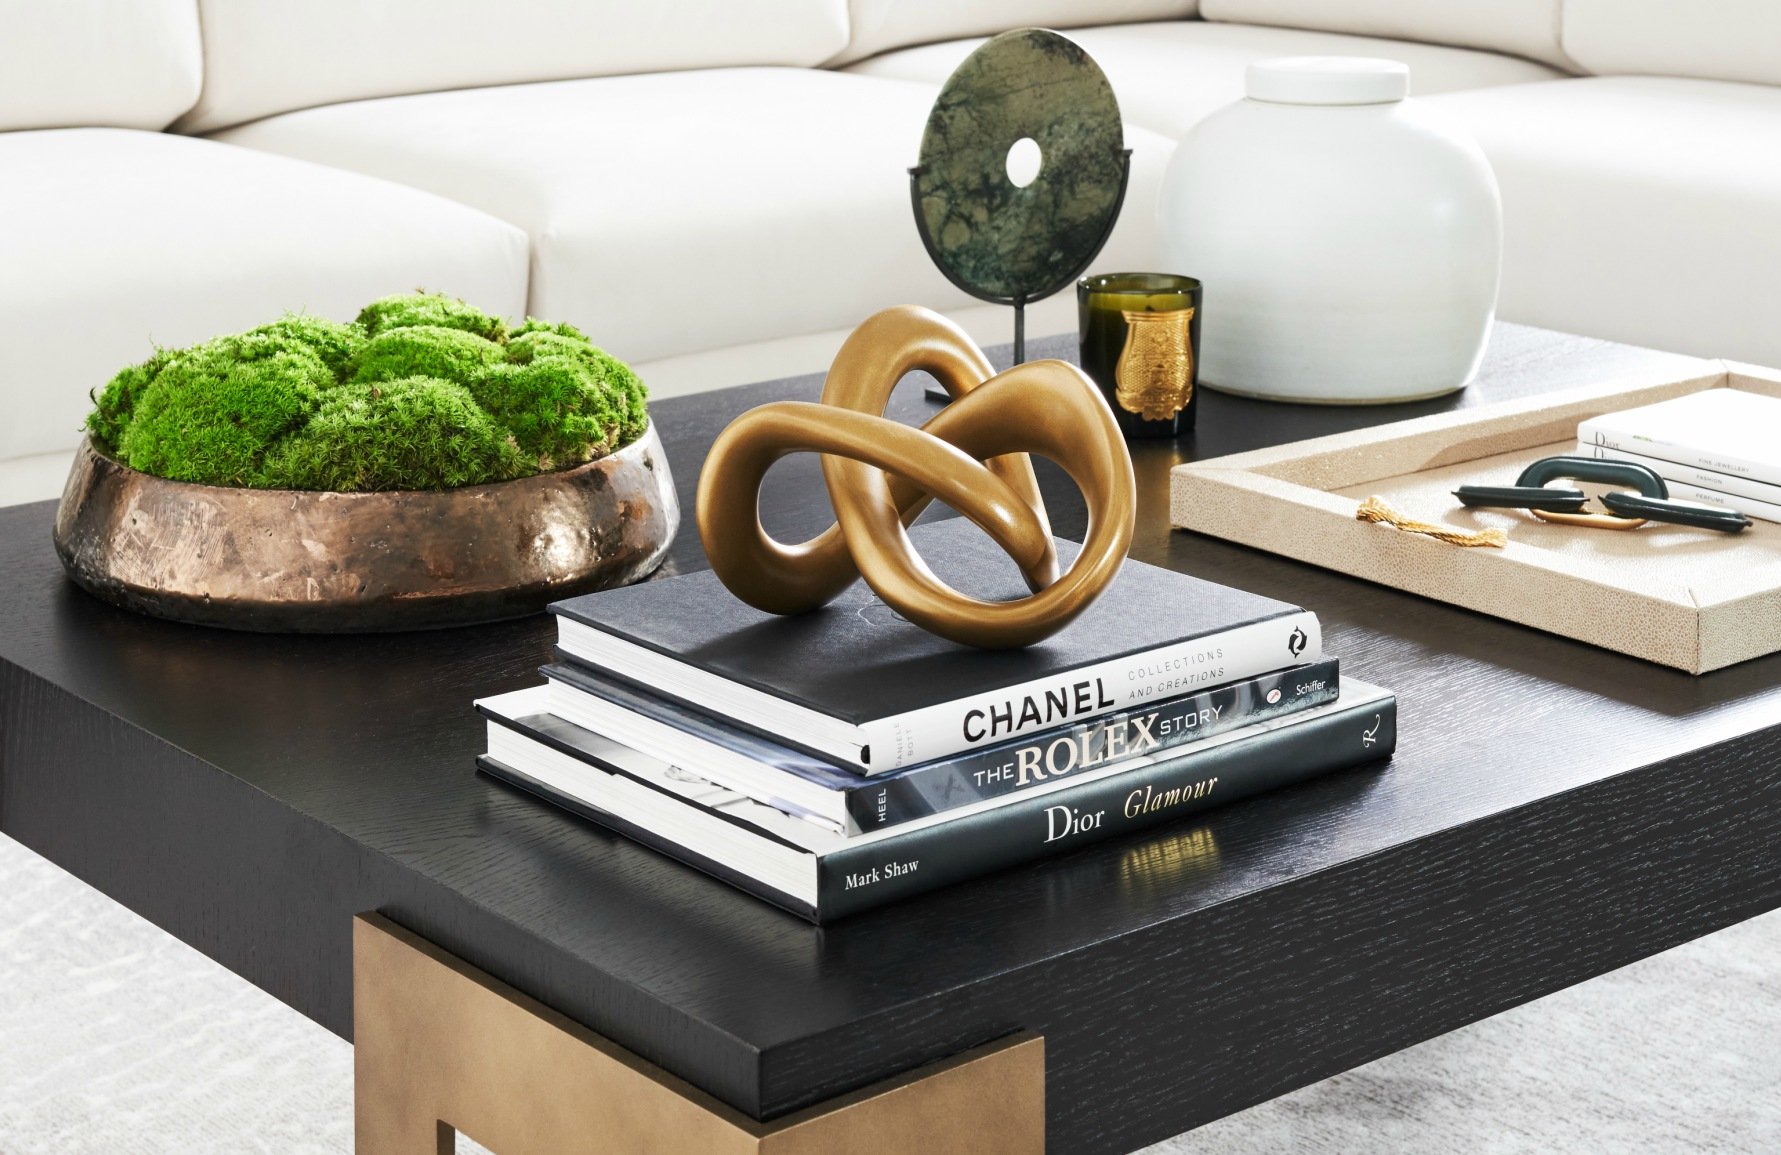 10 of the Most Beautiful Coffee Table Books for Your Home